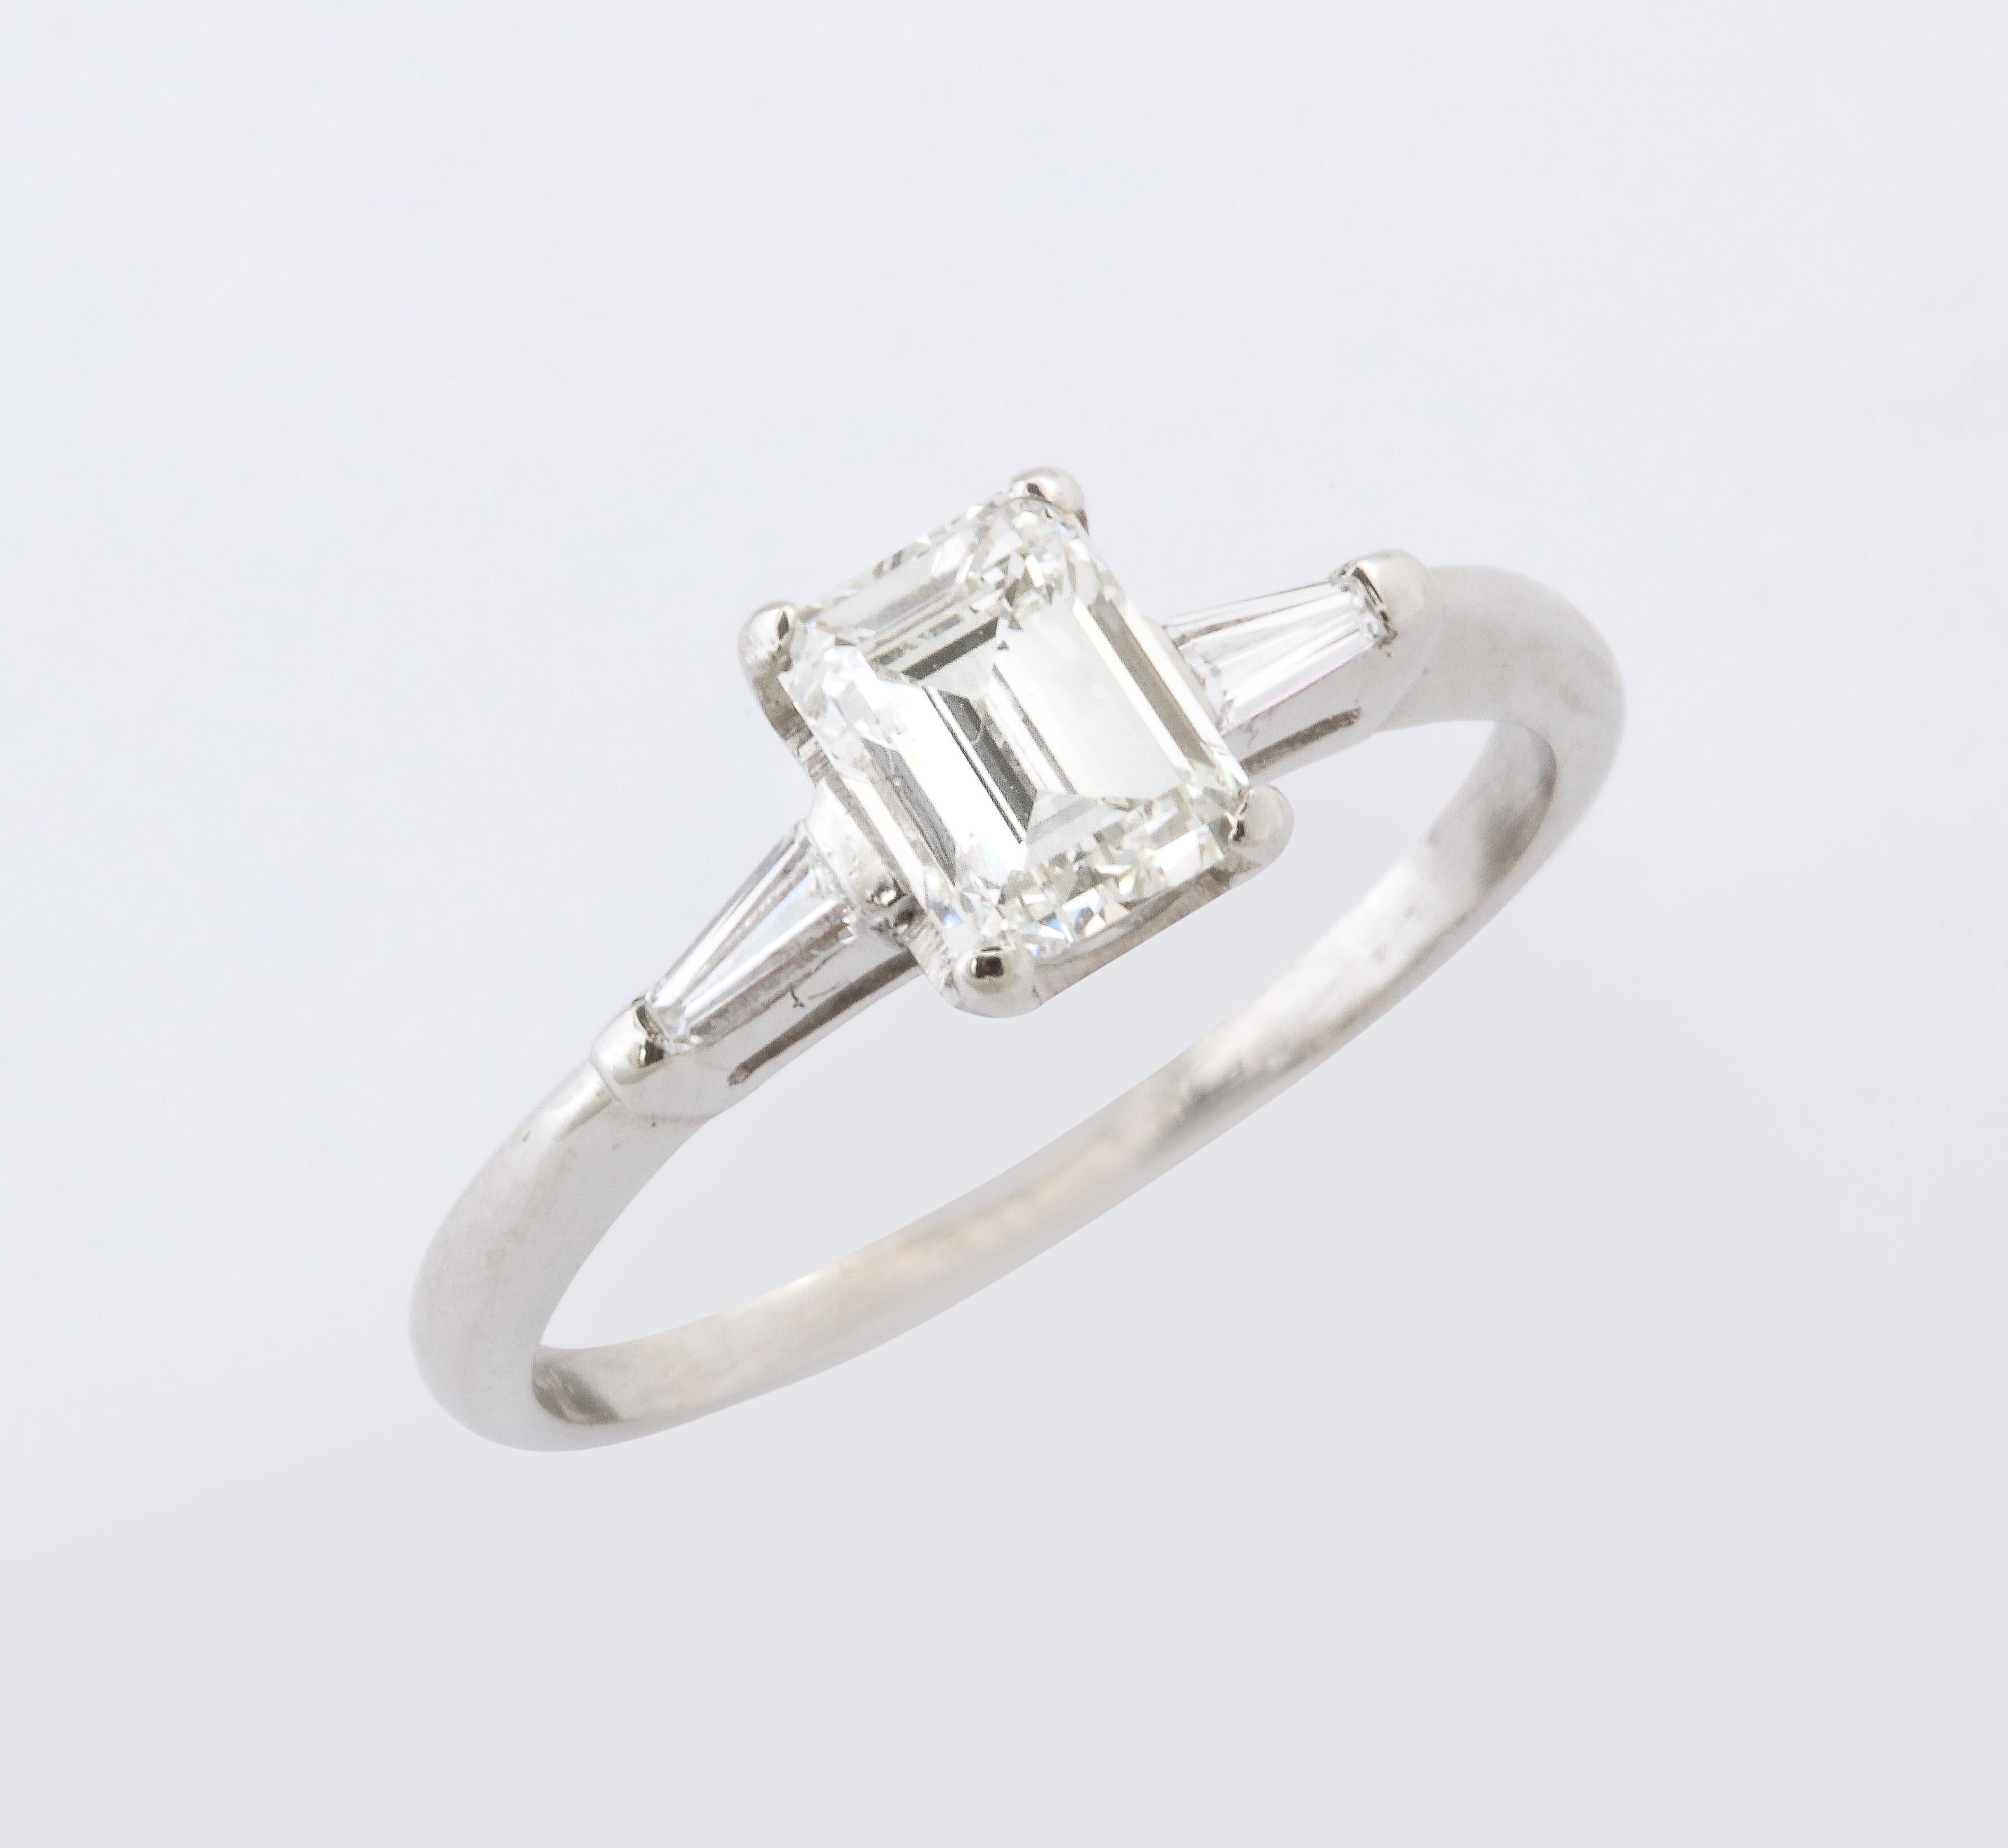 Art Deco Emerald Cut 1.07carat Diamond Engagement Ring with Baguettes GIA cert In Good Condition For Sale In New York, NY